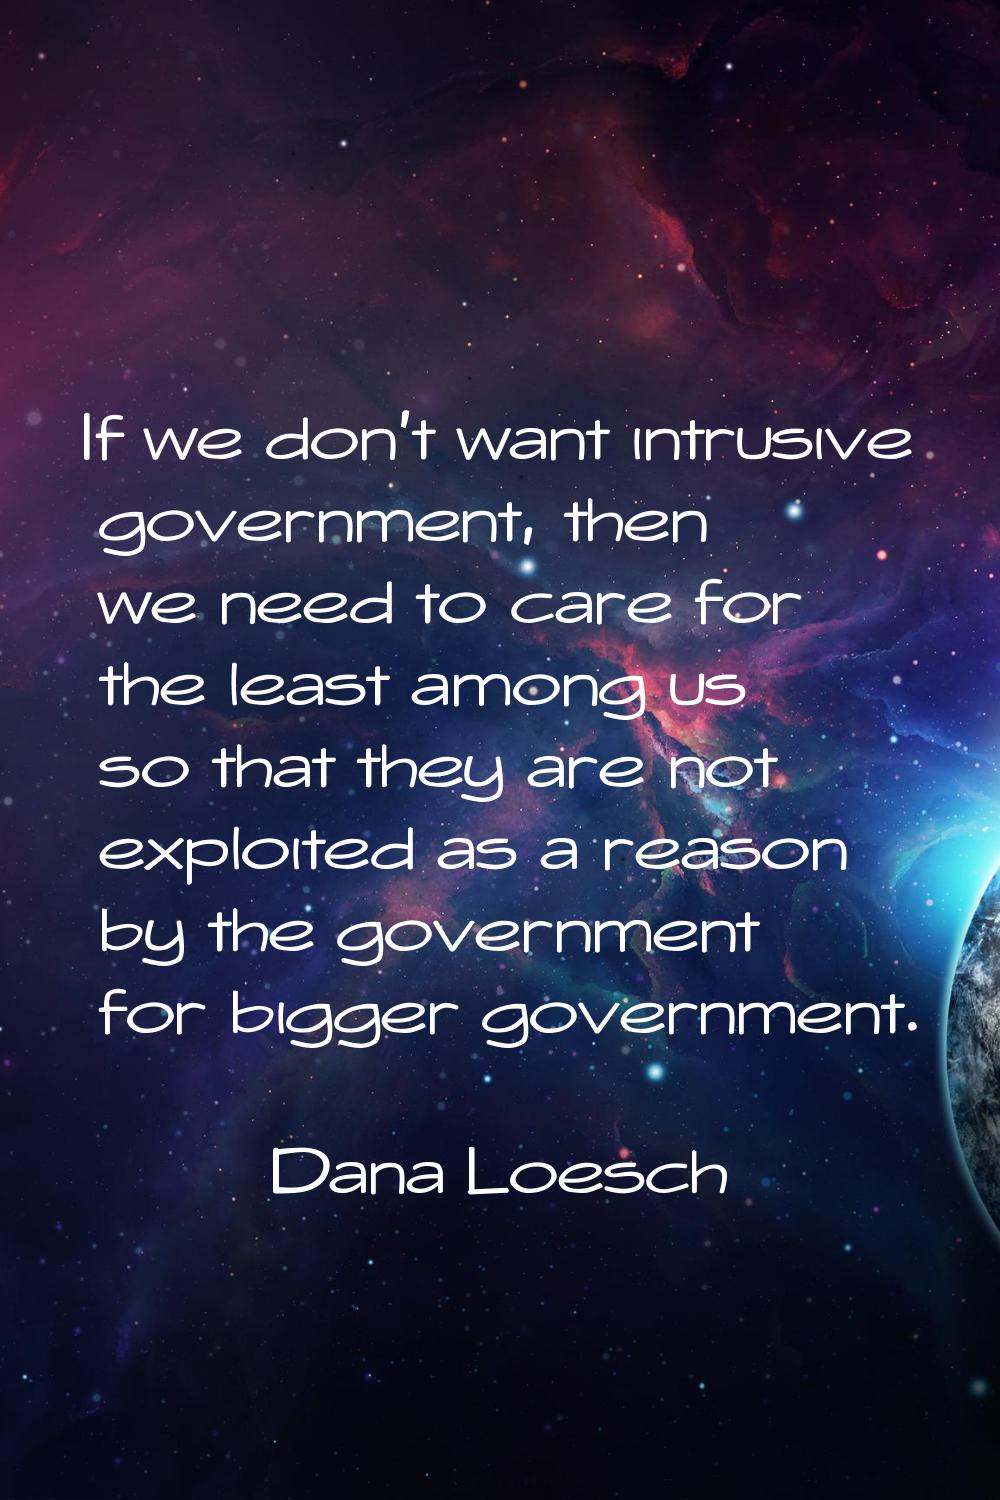 If we don't want intrusive government, then we need to care for the least among us so that they are